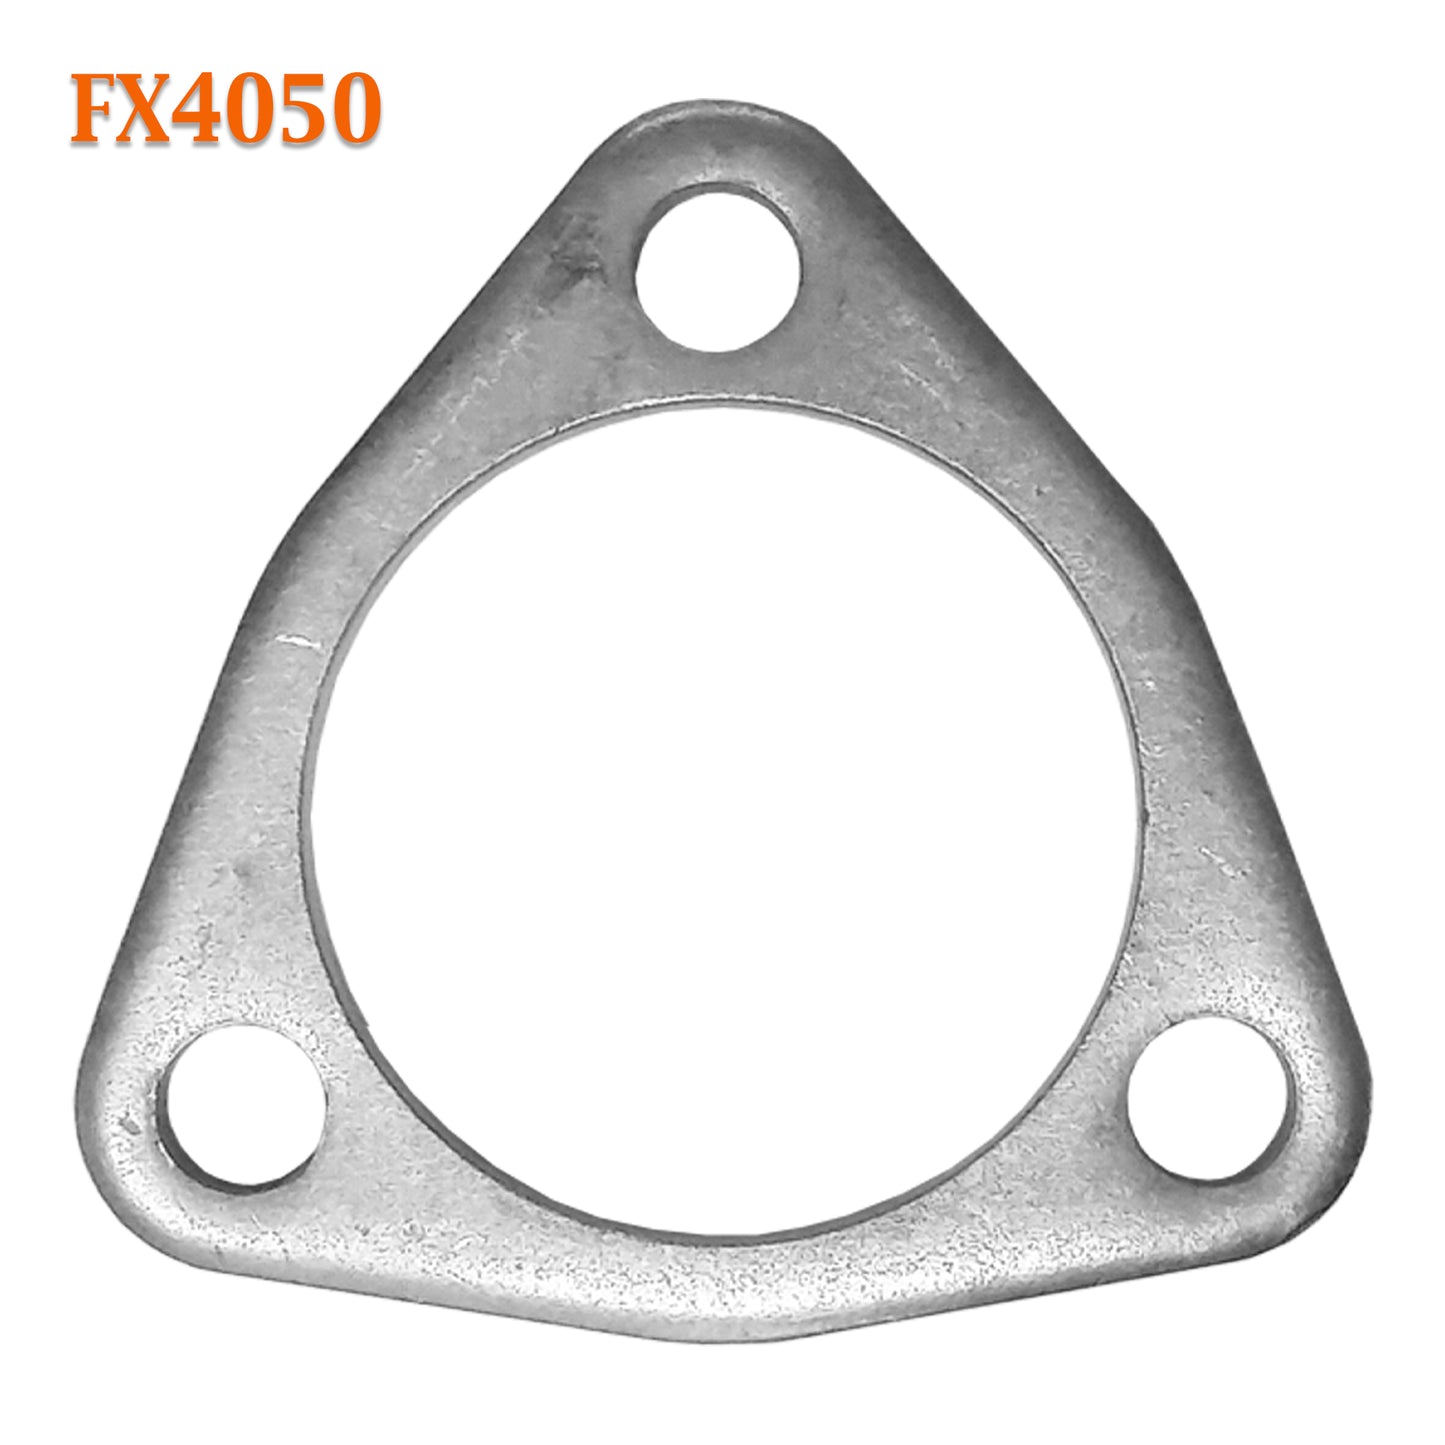 FX4050 2 1/2" 2.5" ID Triangle Exhaust Flange For 2 1/4" 2.25" OD Flared Y Pipe